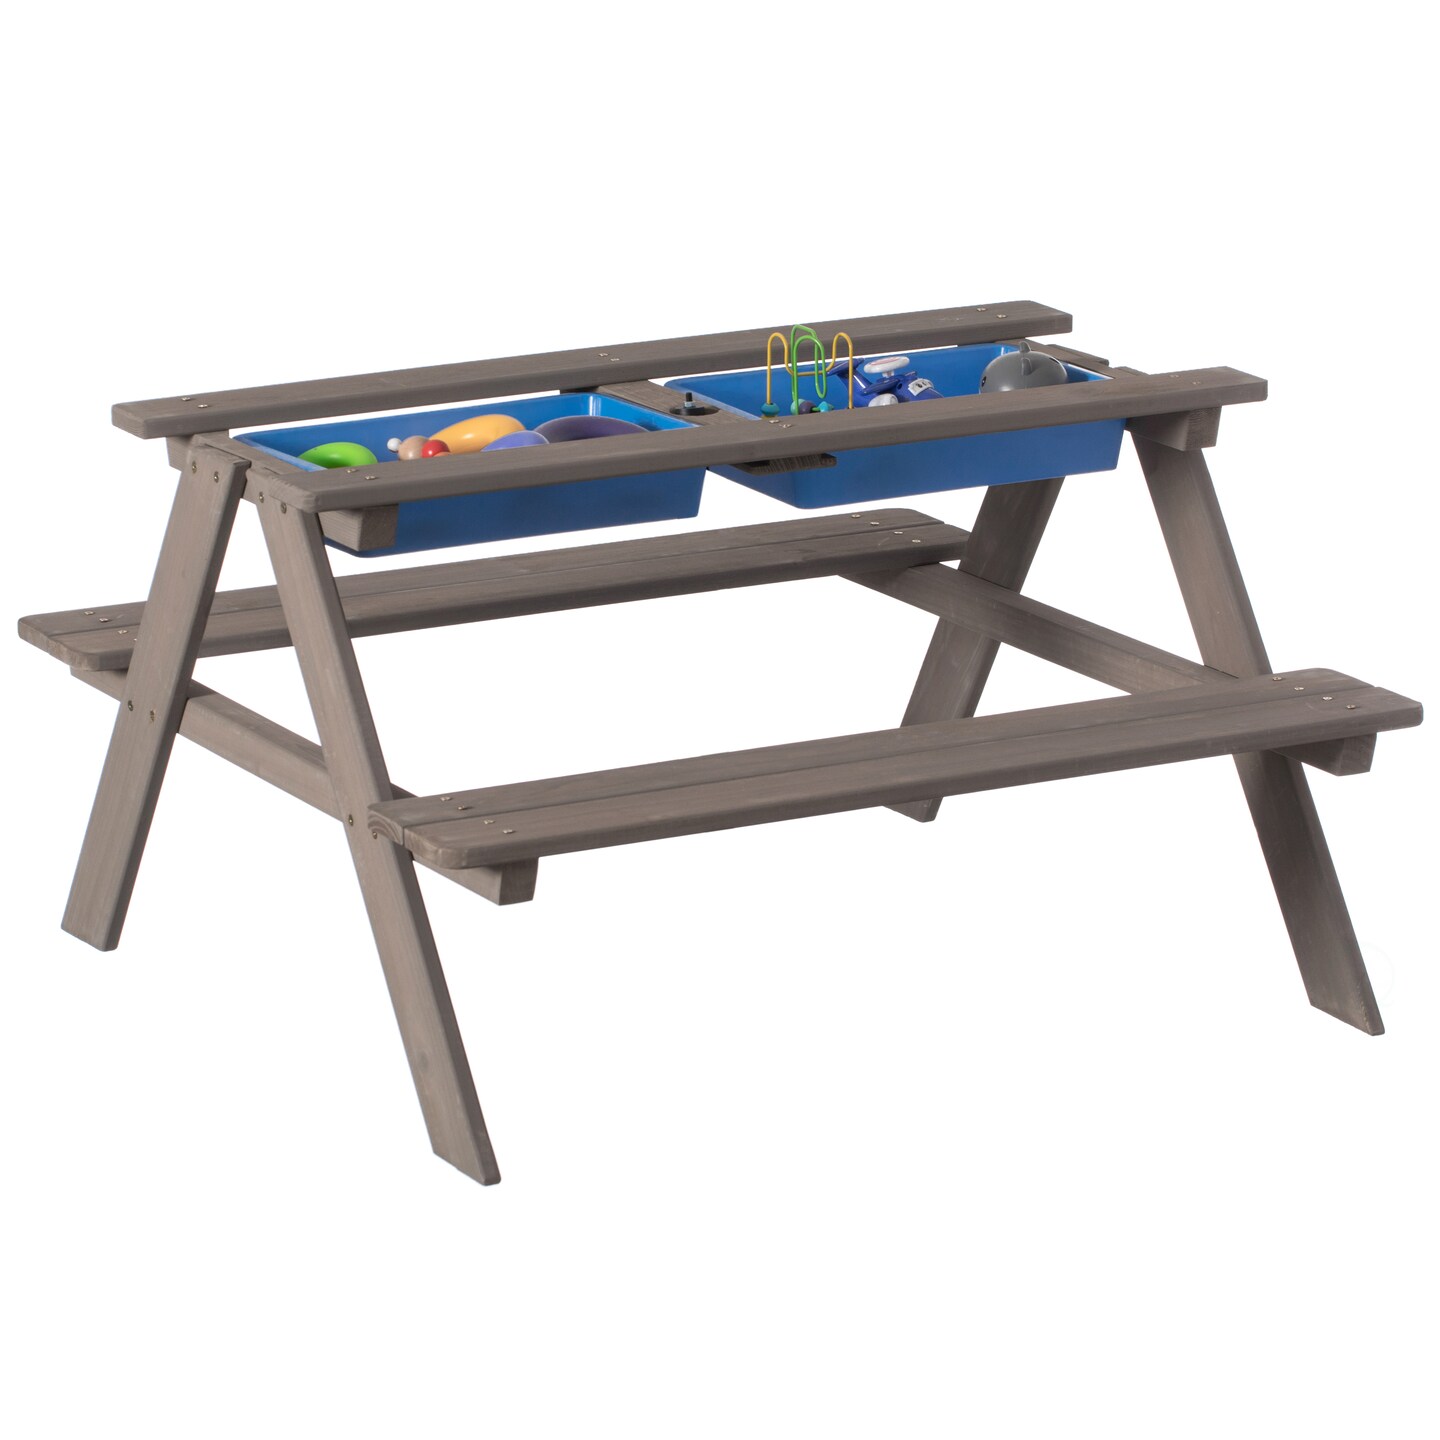 Kids Picnic Play Table, Sandbox Table with Umbrella Hole and 2 Play Boxes with Removable Top, Gray